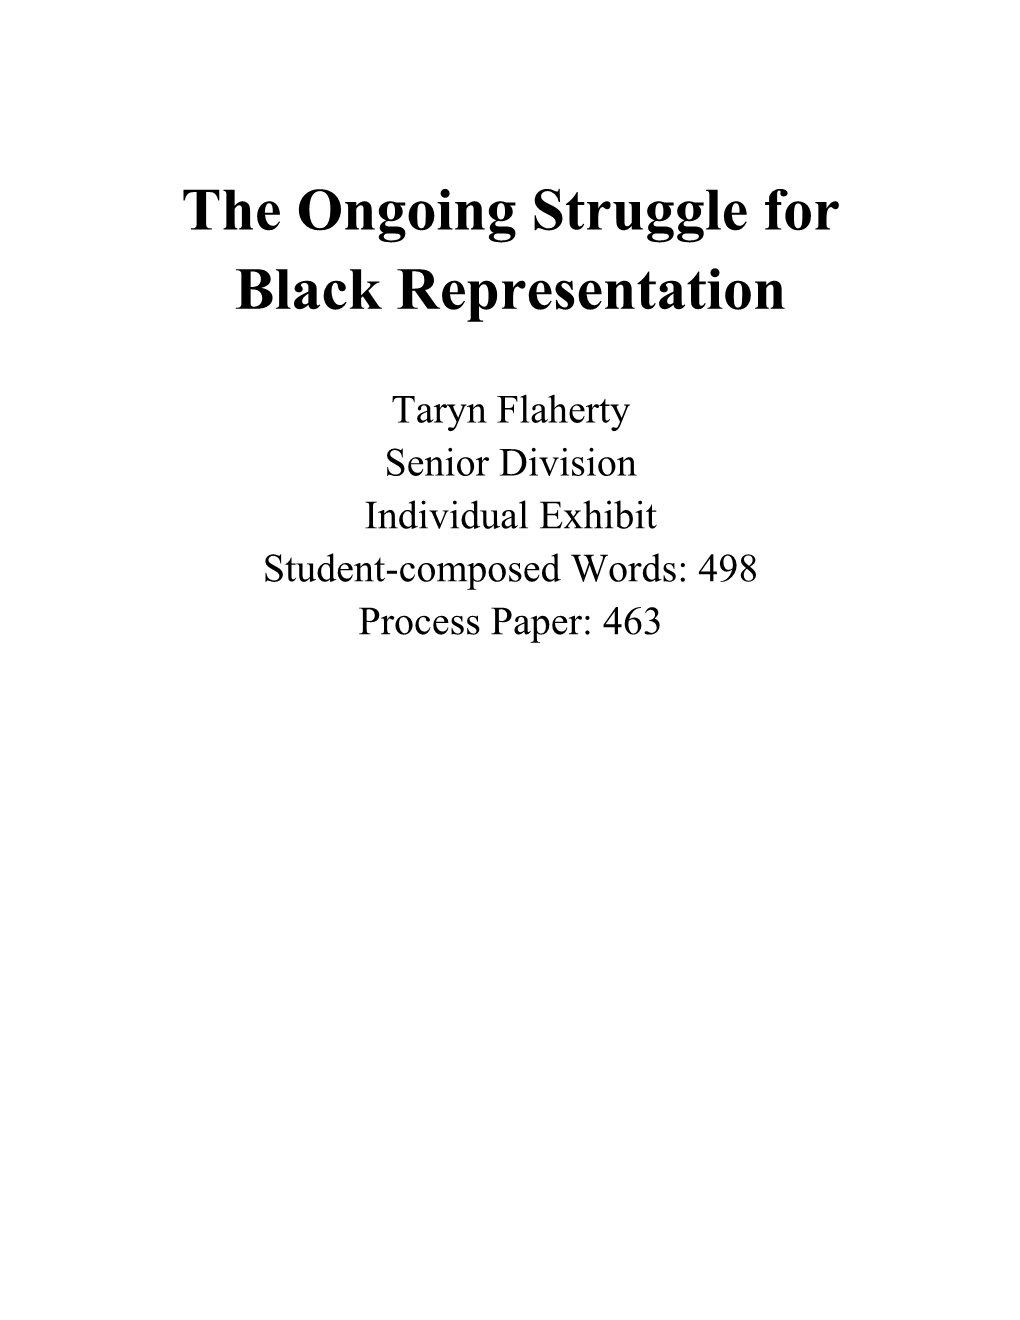 The Ongoing Struggle for Black Representation